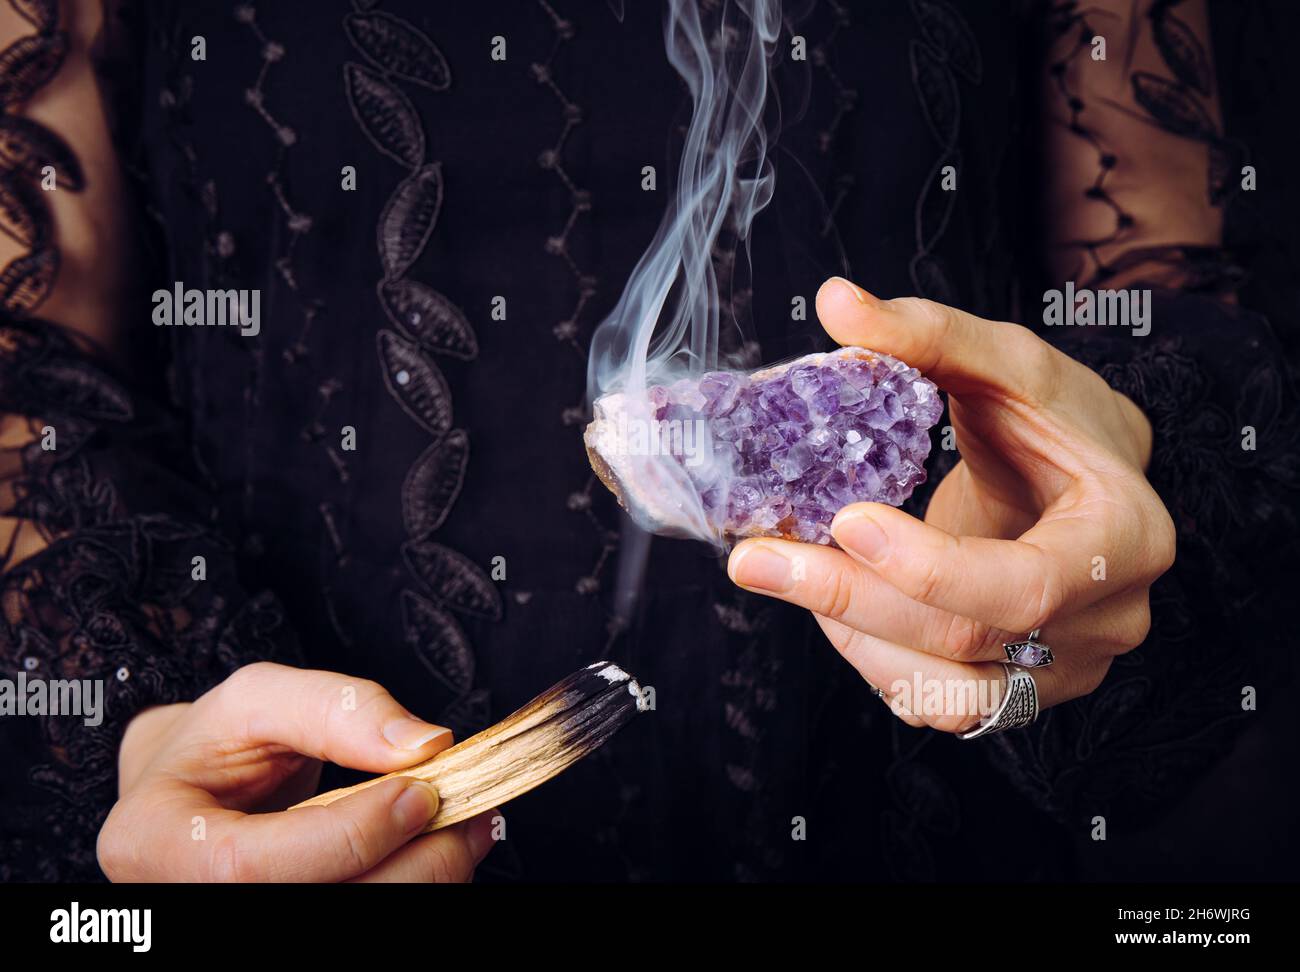 Close up view of woman in black lace dress, cleansing amethyst crystal cluster gemstone by smudging Palo Santo wood stick. Remove negative energy. Stock Photo